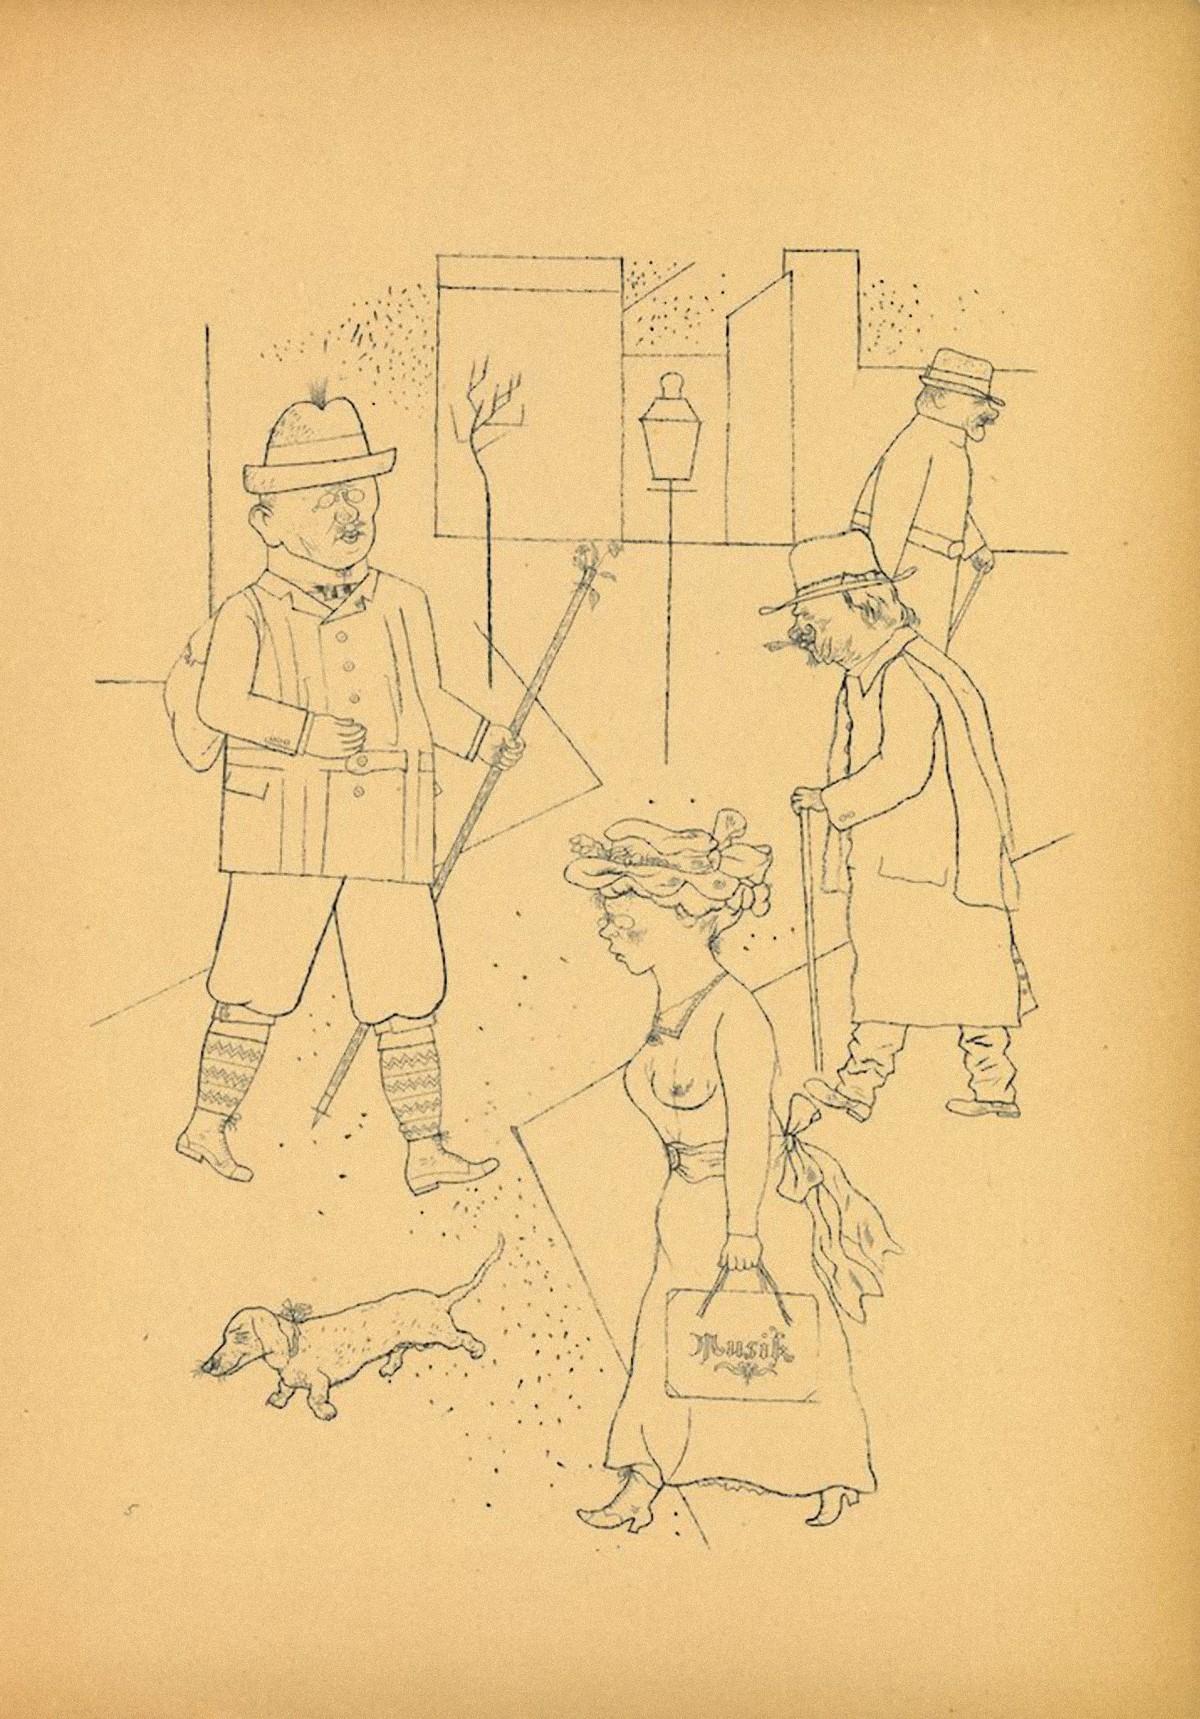 Greeting - Original Offset and Lithograph by George Grosz - 1923